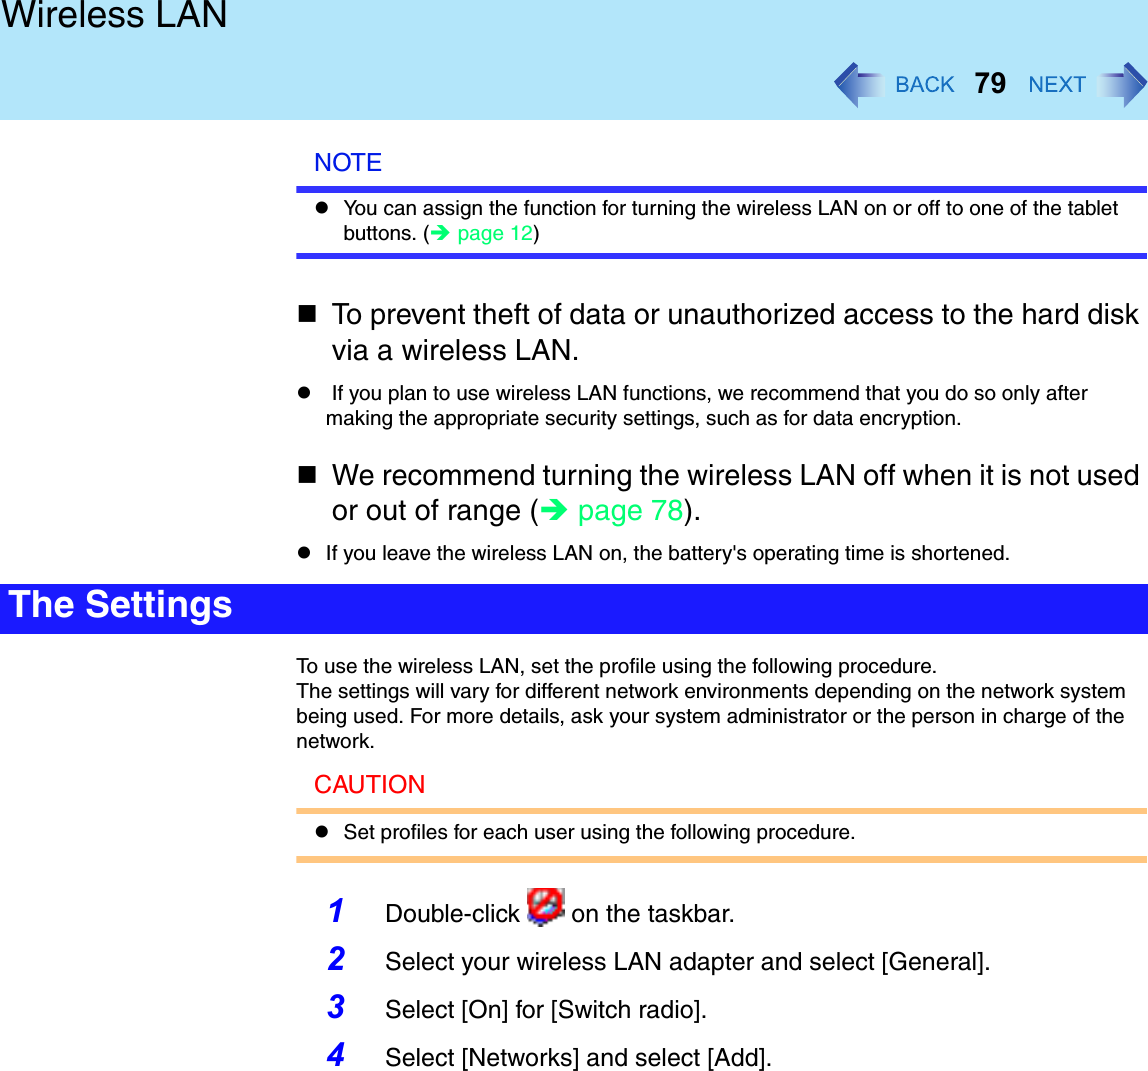 79Wireless LANNOTEYou can assign the function for turning the wireless LAN on or off to one of the tablet buttons. (page 12)To prevent theft of data or unauthorized access to the hard disk via a wireless LAN. If you plan to use wireless LAN functions, we recommend that you do so only after making the appropriate security settings, such as for data encryption.We recommend turning the wireless LAN off when it is not used or out of range (page 78).If you leave the wireless LAN on, the battery&apos;s operating time is shortened.To use the wireless LAN, set the profile using the following procedure.The settings will vary for different network environments depending on the network system being used. For more details, ask your system administrator or the person in charge of the network.CAUTIONSet profiles for each user using the following procedure.1Double-click   on the taskbar.2Select your wireless LAN adapter and select [General].3Select [On] for [Switch radio].4Select [Networks] and select [Add].The Settings